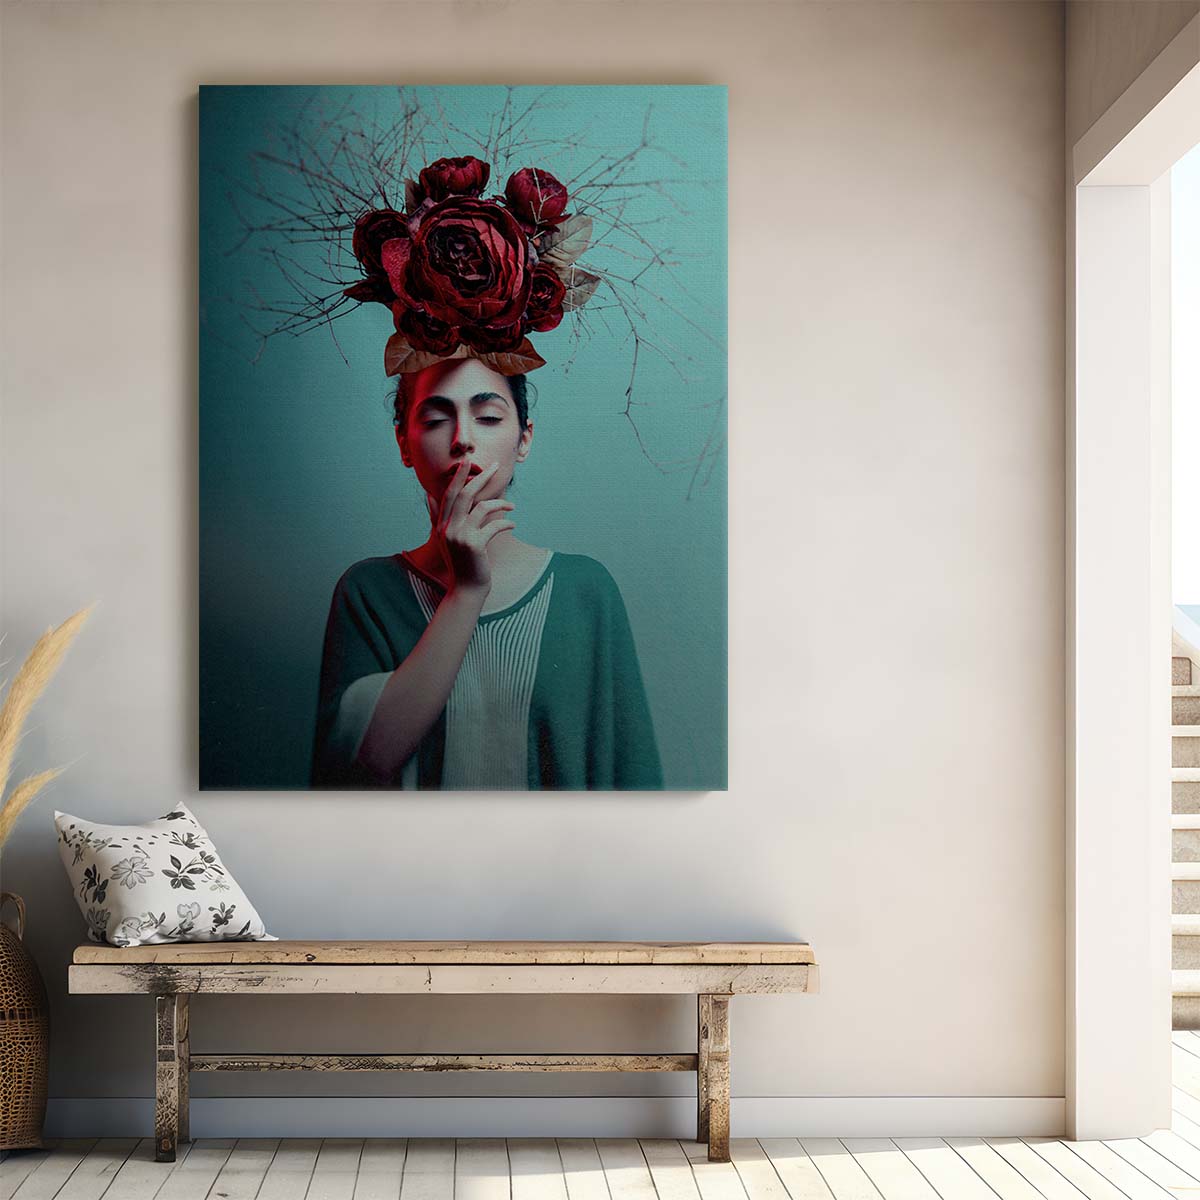 Romantic Floral Woman Portrait - Teal & Red Rose Botanical Photography by Luxuriance Designs, made in USA